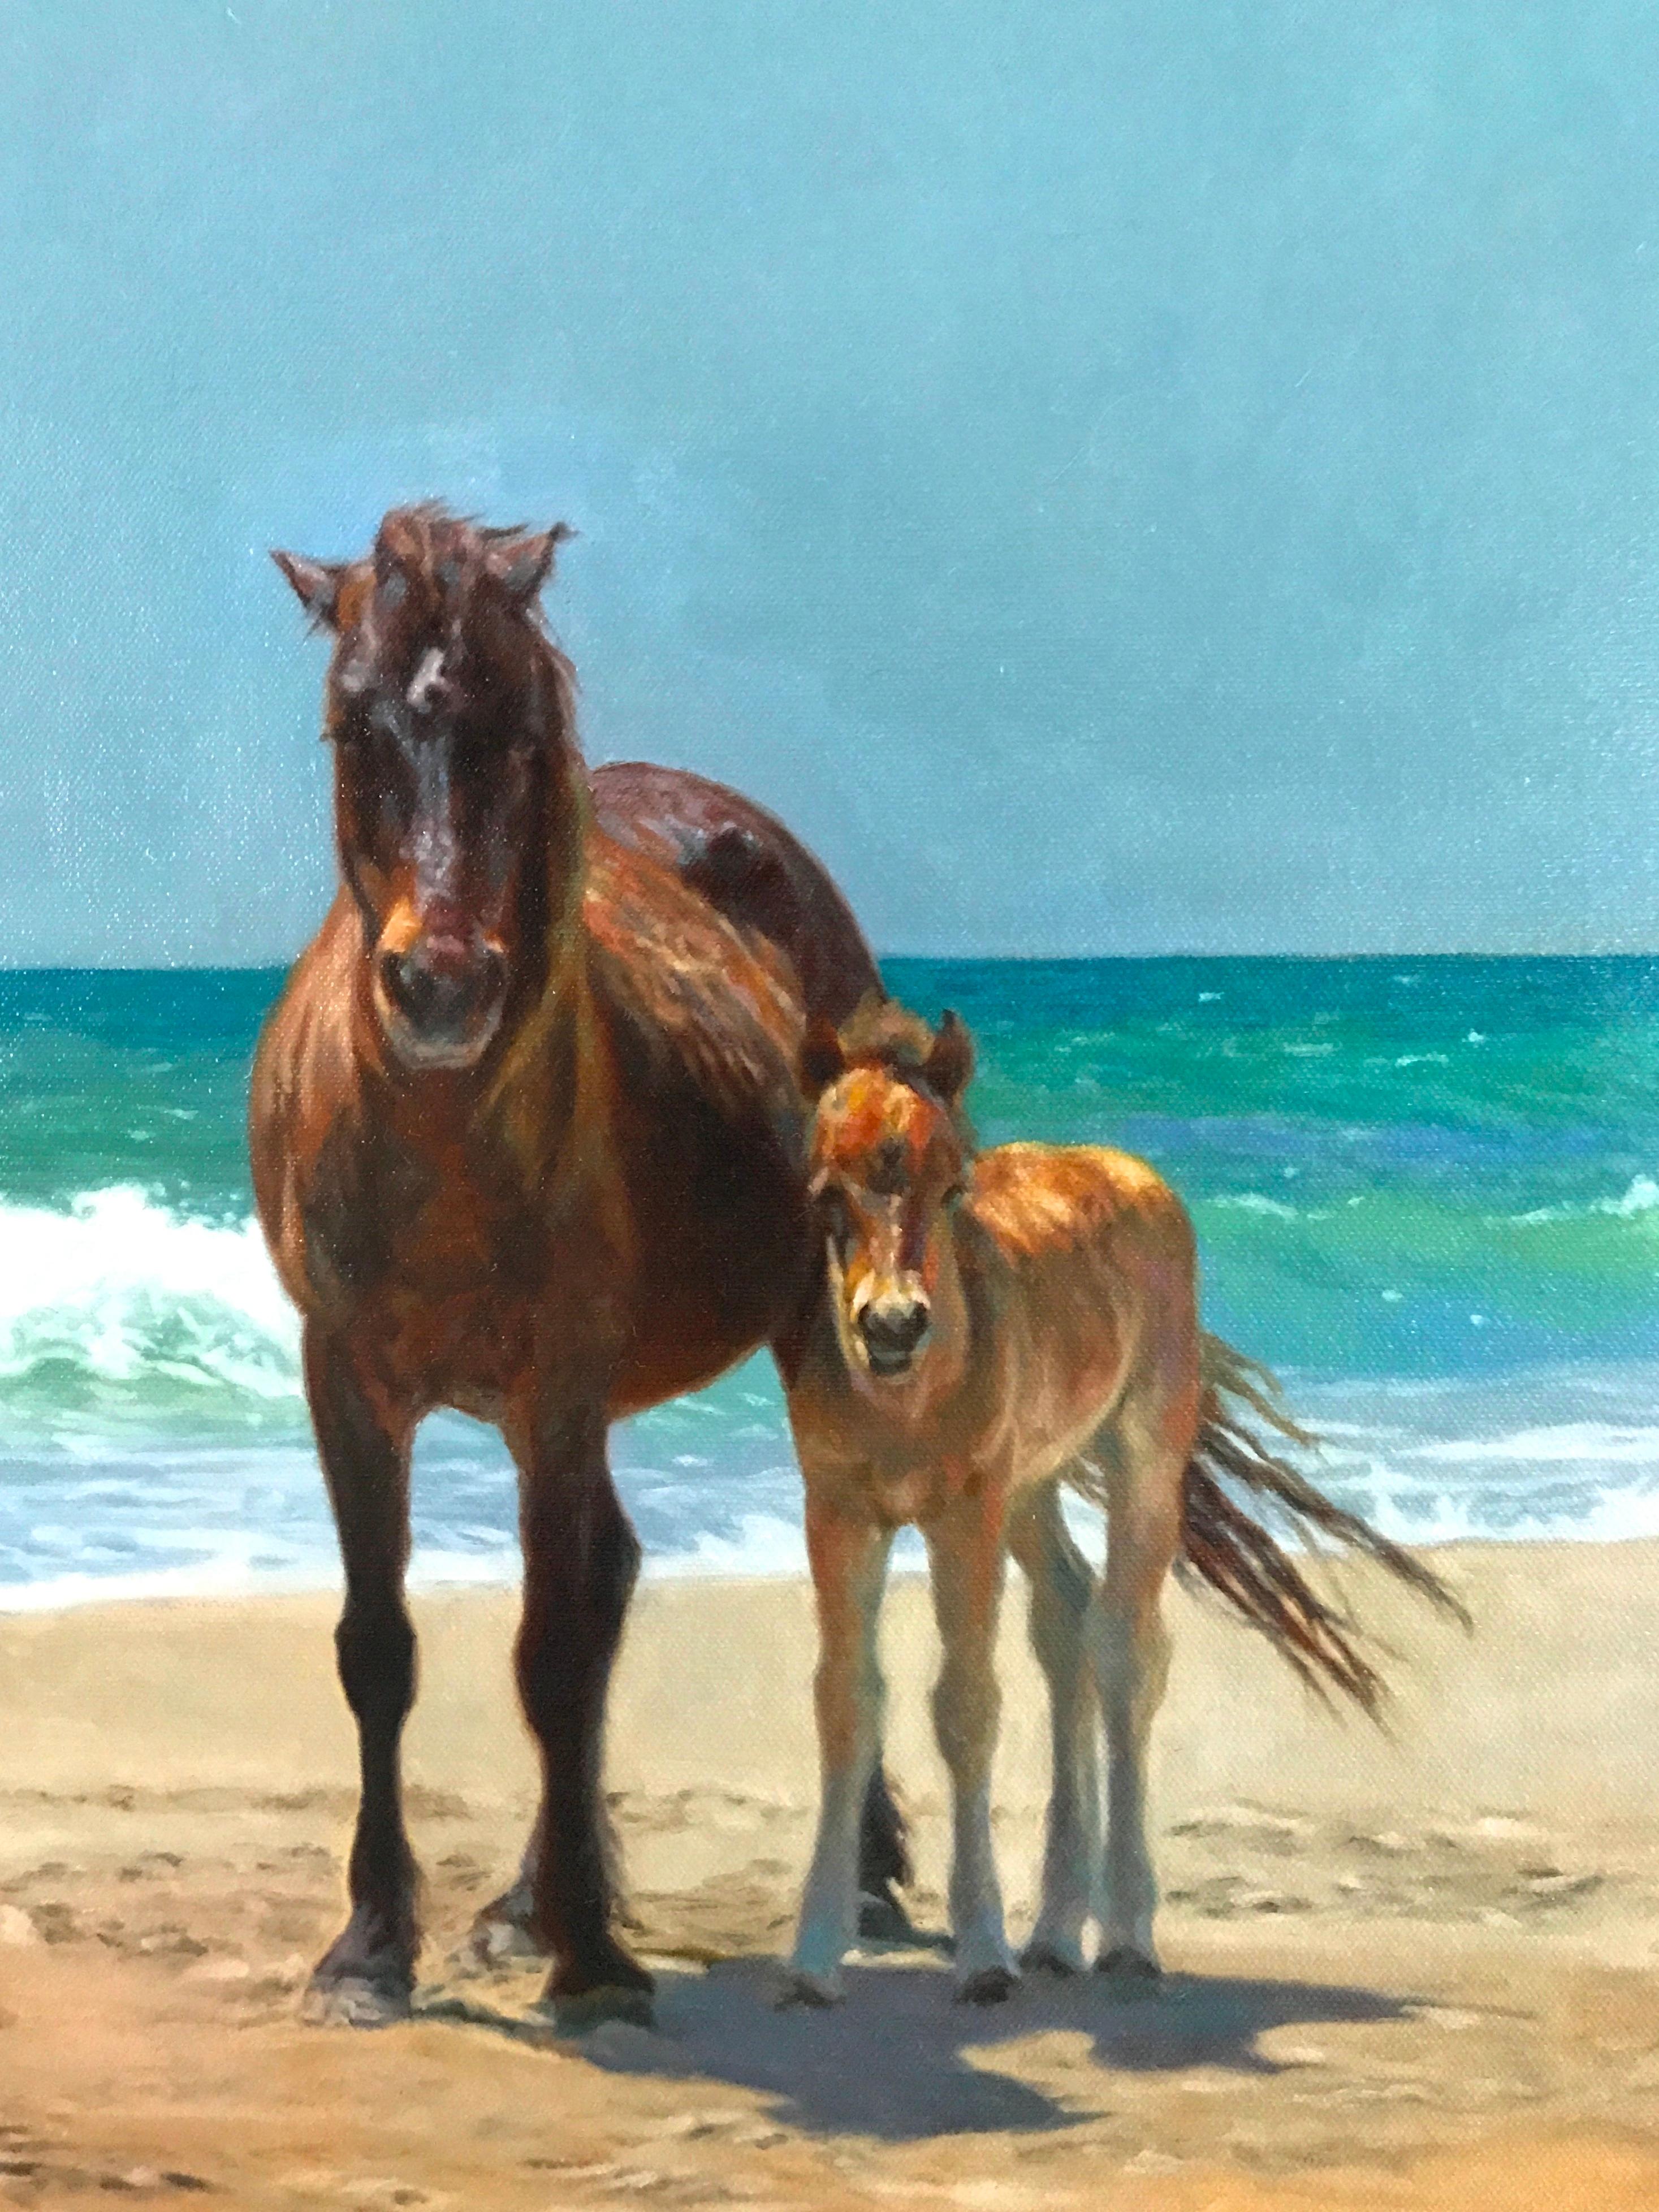 Exquisite realist oil landscape with horses enjoying the ocean breeze and peace - Painting by Catrina Monroe